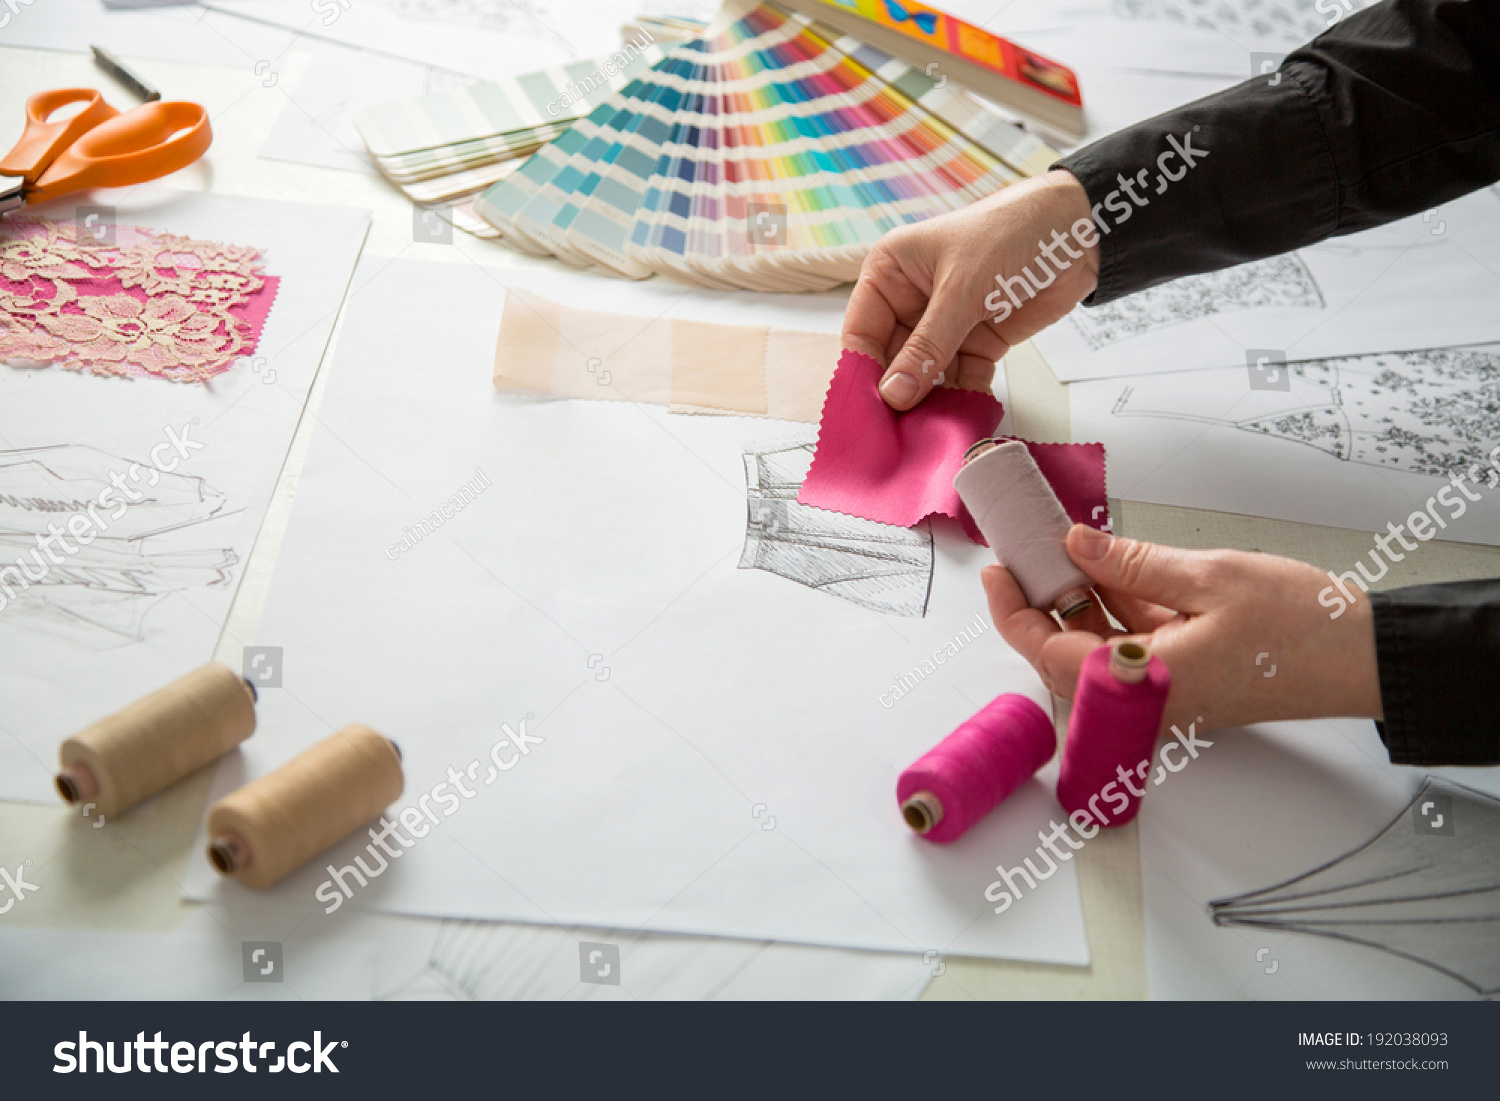 Fashion Designers, Working In Progress On Tailor Table Stock Photo